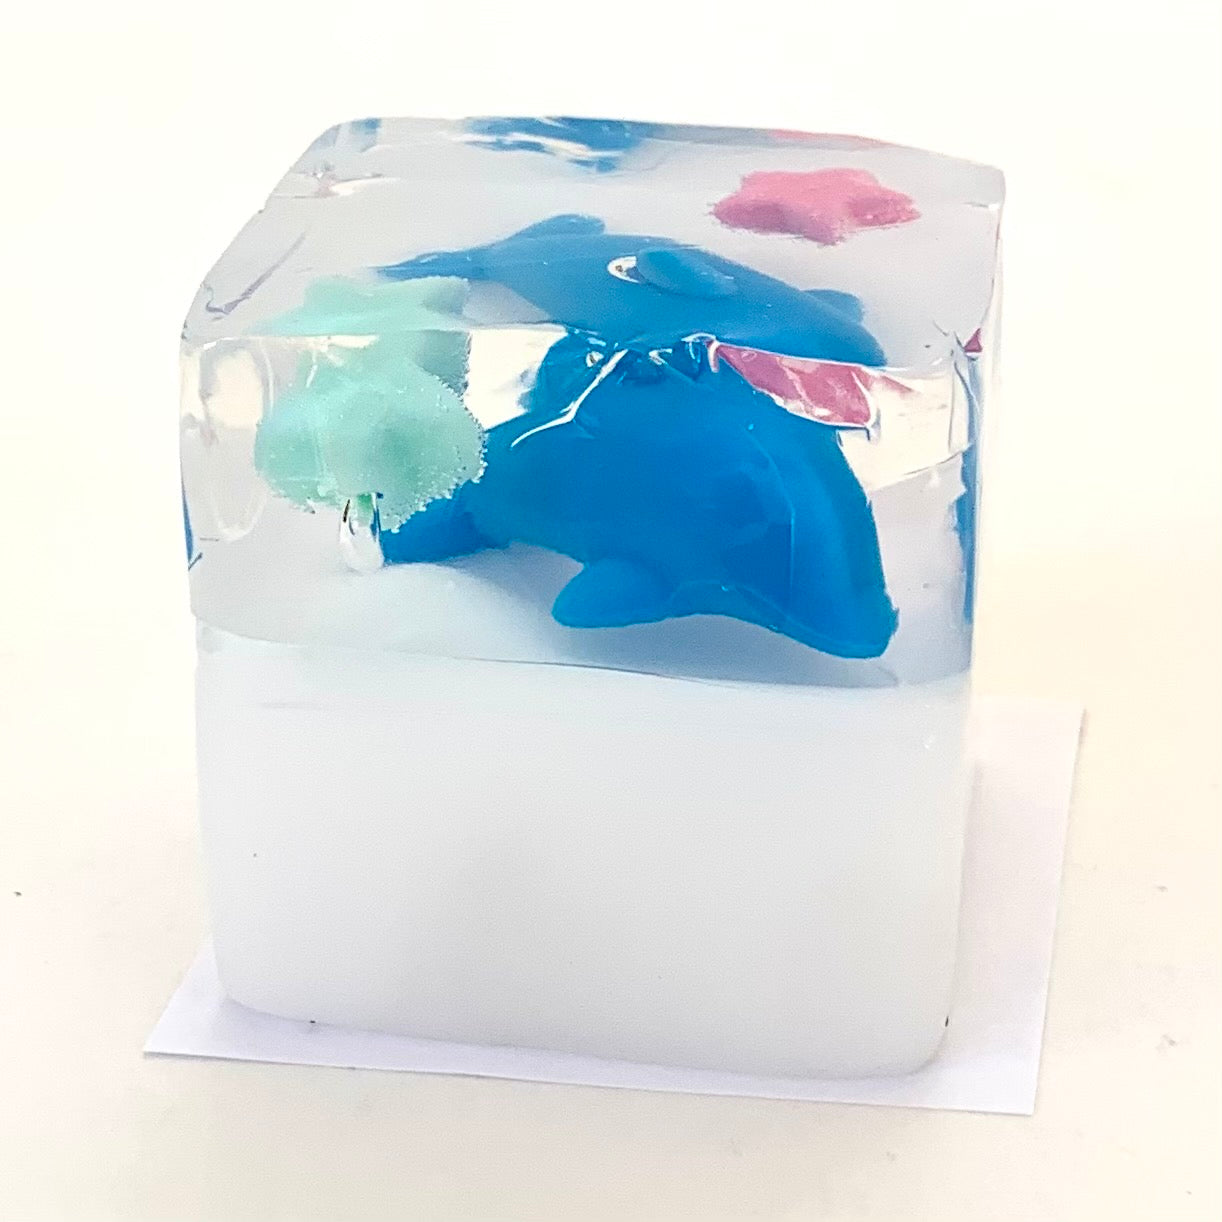 X 70832 DOLPHIN GUMMY MODEL CAPSULE-DISCONTINUED